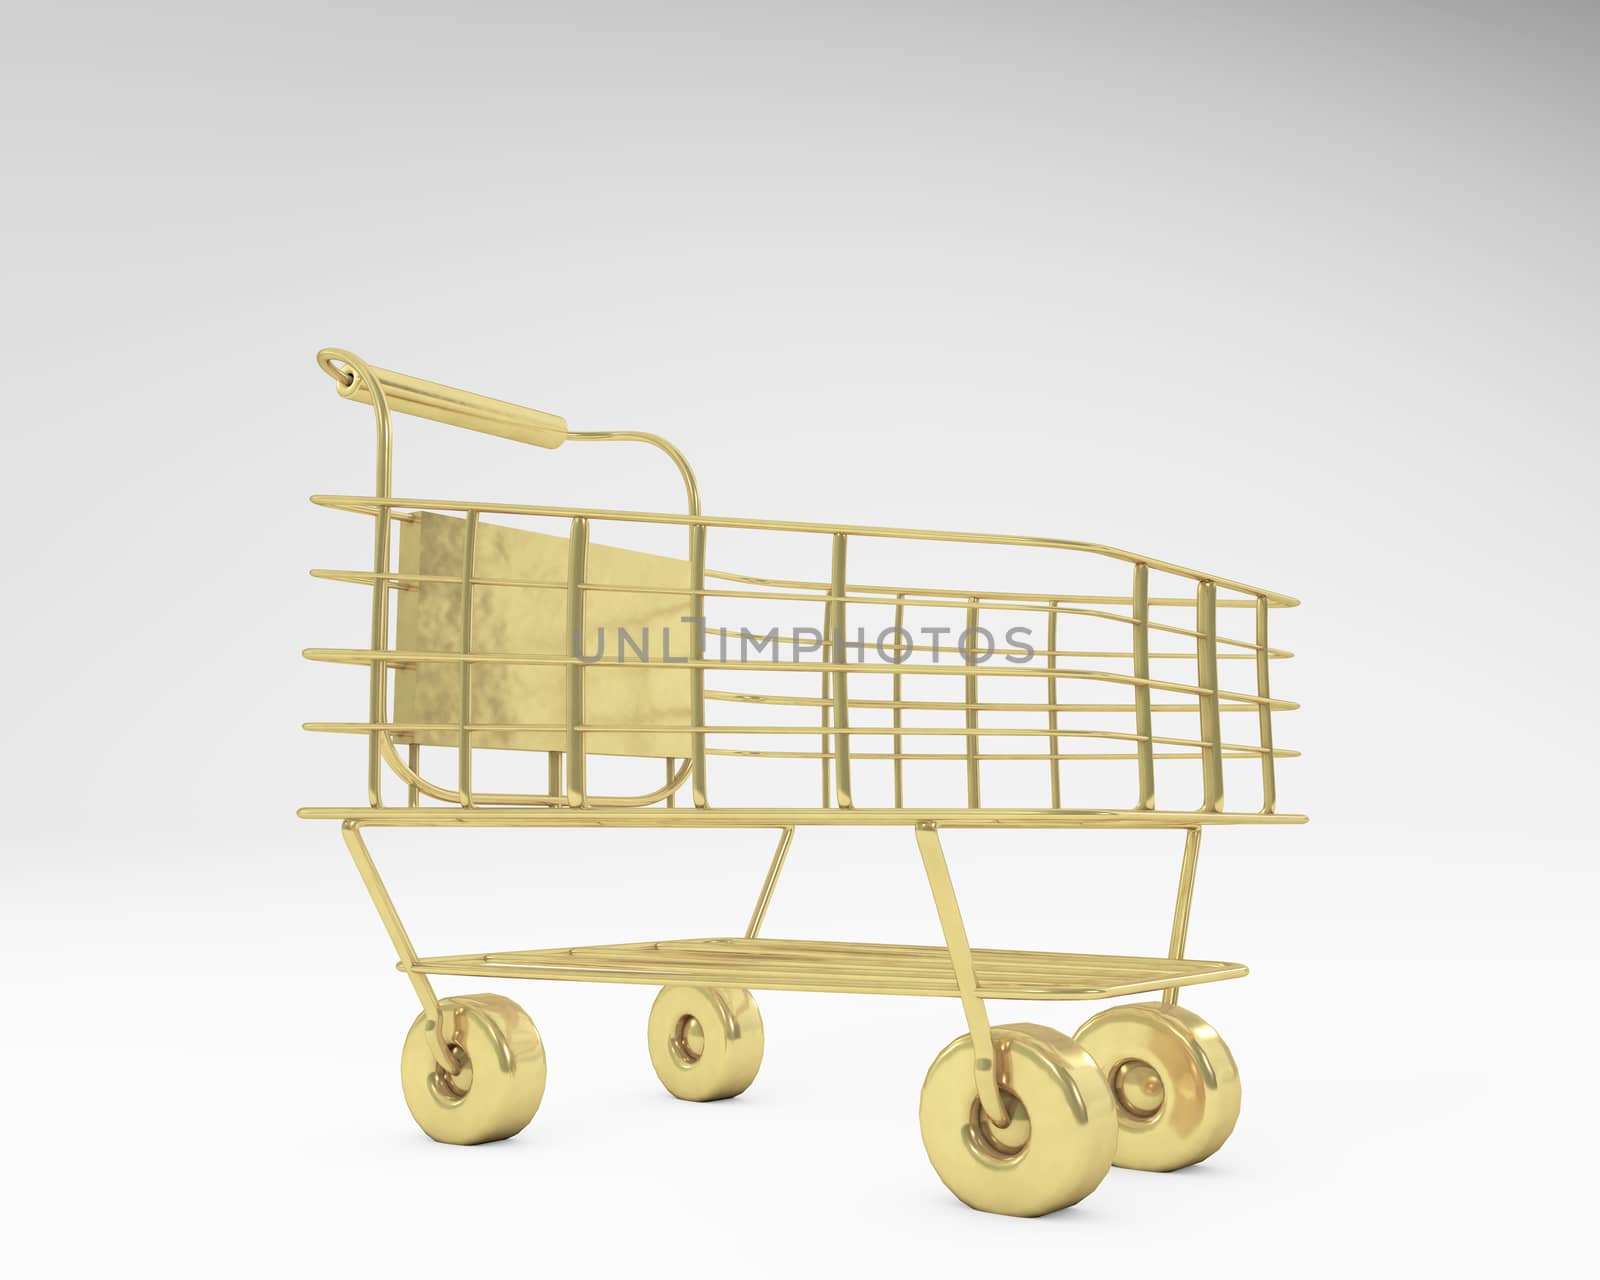 Shopping Cart golden texture close up perspective 3d rendering isolated on white